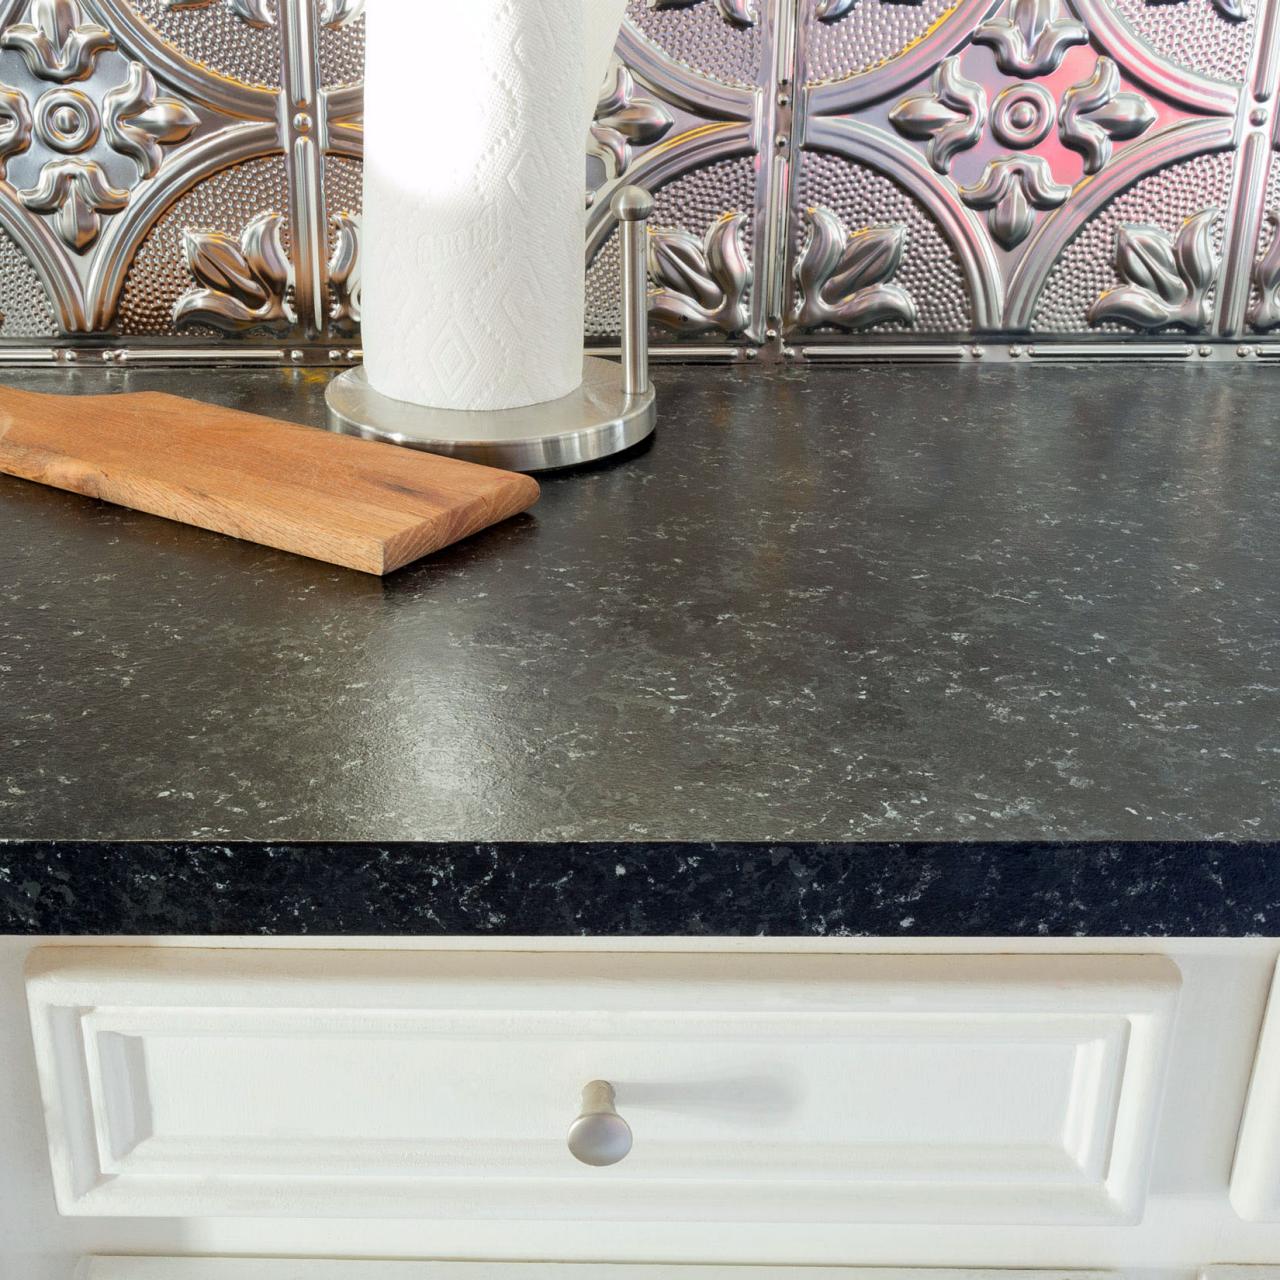 How To Cover Laminate Countertops With Tile